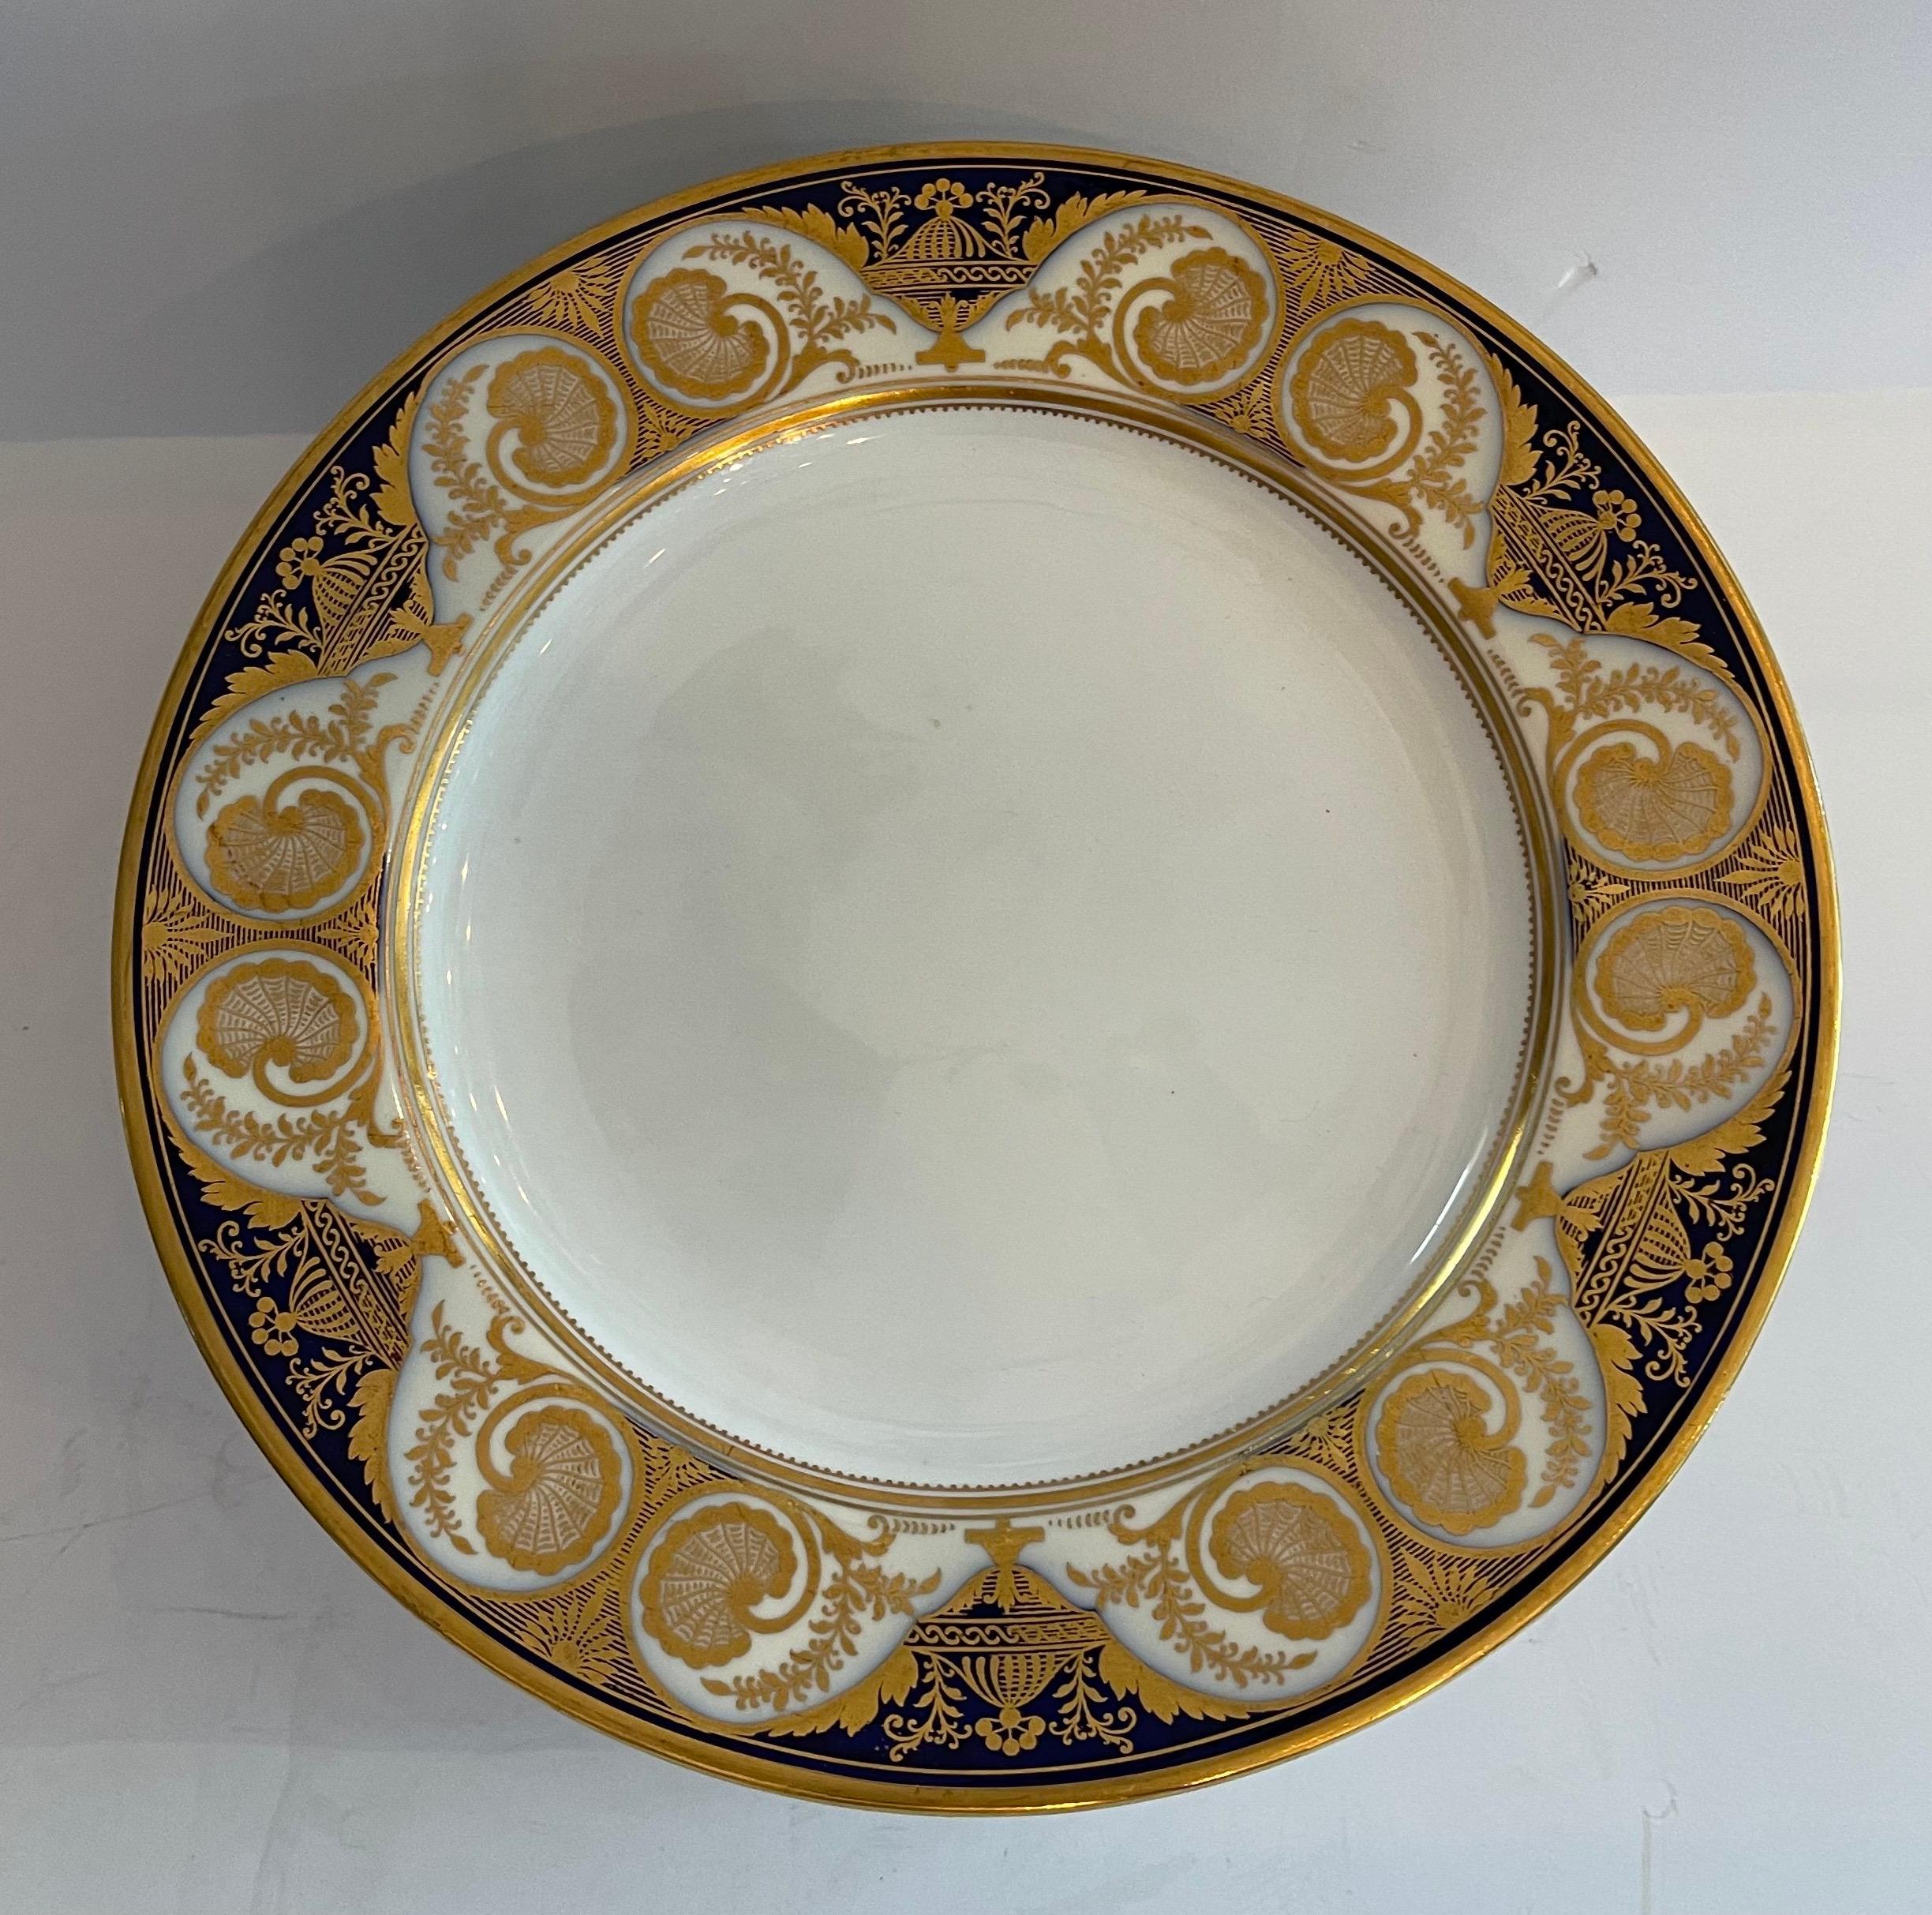 A Wonderful set Of 12 Spode Copeland's English fine porcelain dinner service plates with urns set in a cobalt blue & gold border on a white base.